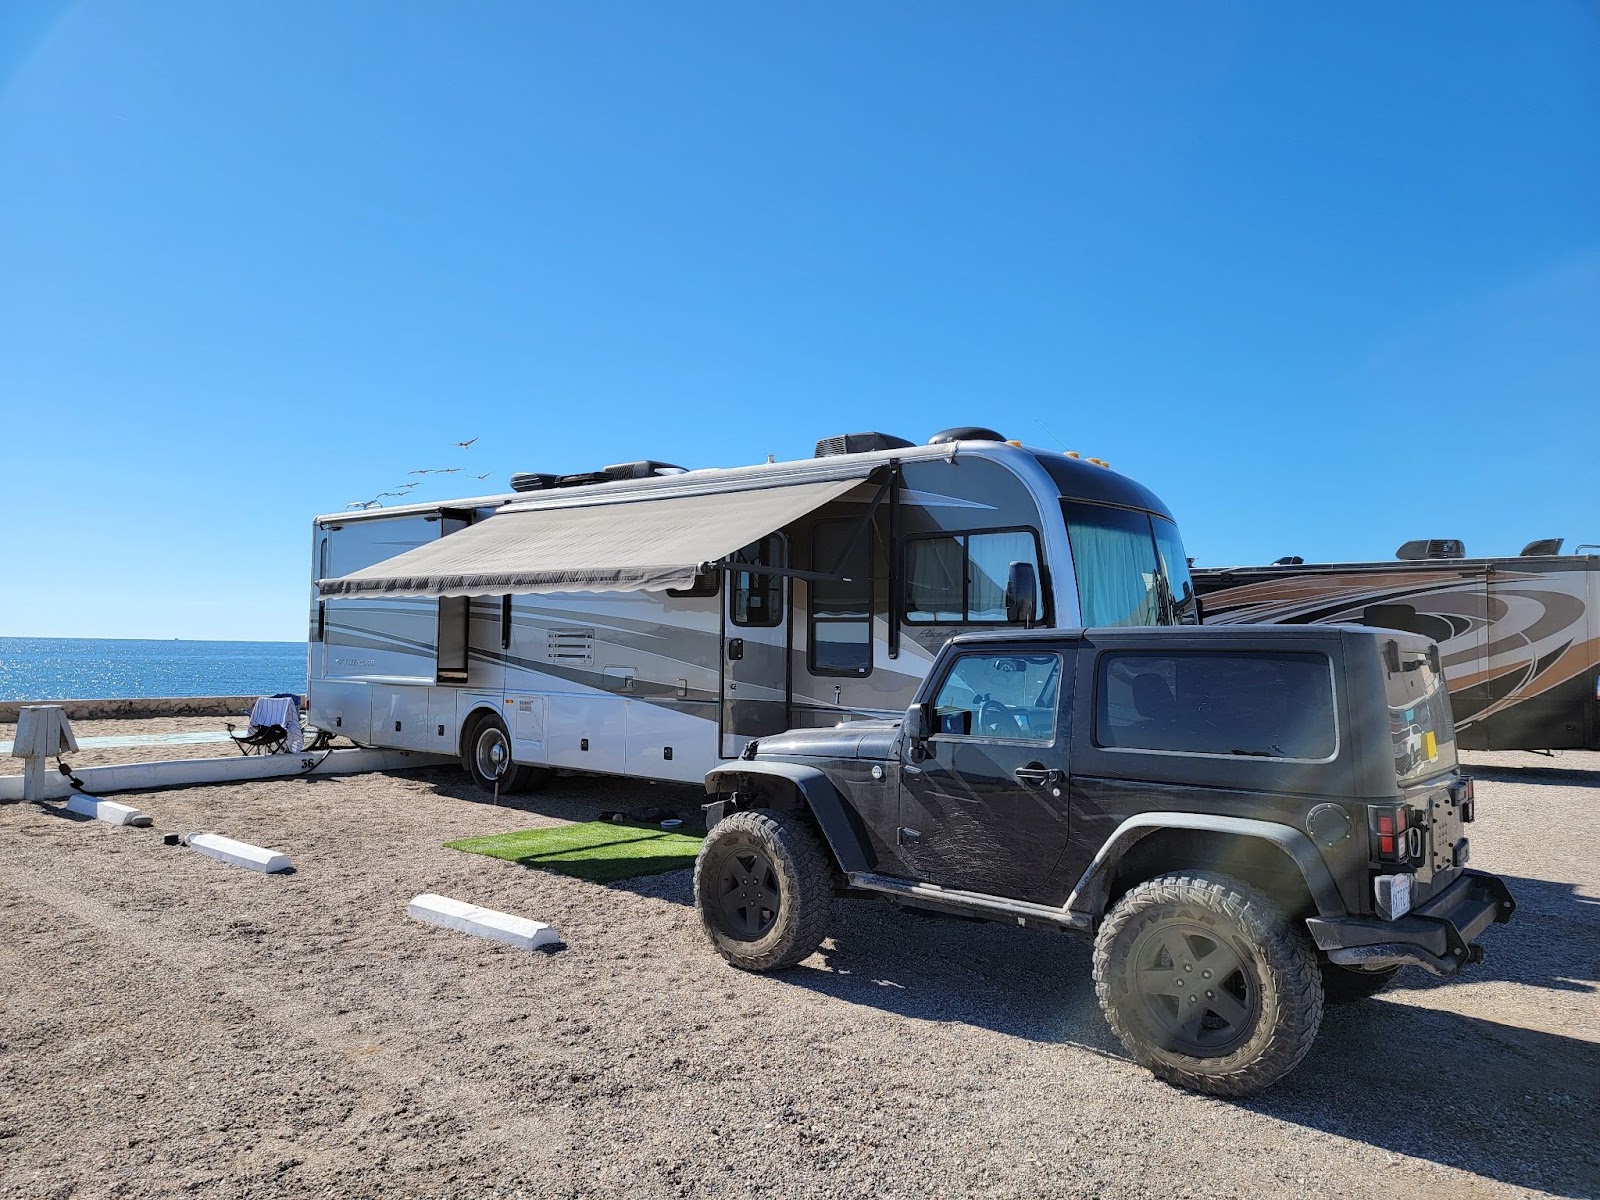 A Jeep and an RV parked next to each other in a parking lot with a view of the ocean..